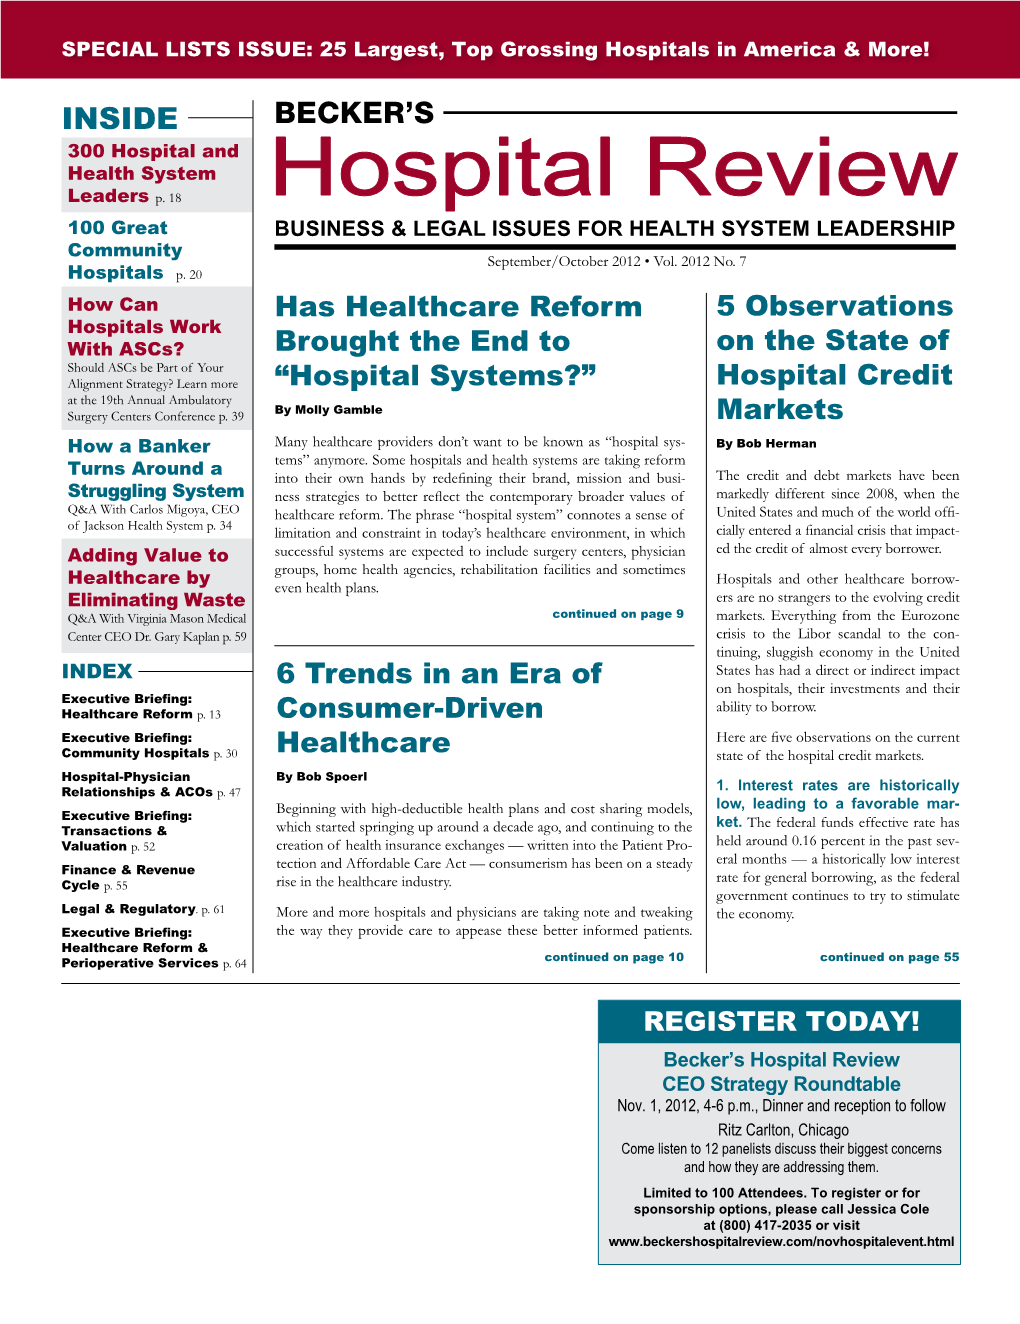 Becker's Hospital Review CFO E-Weekly Report